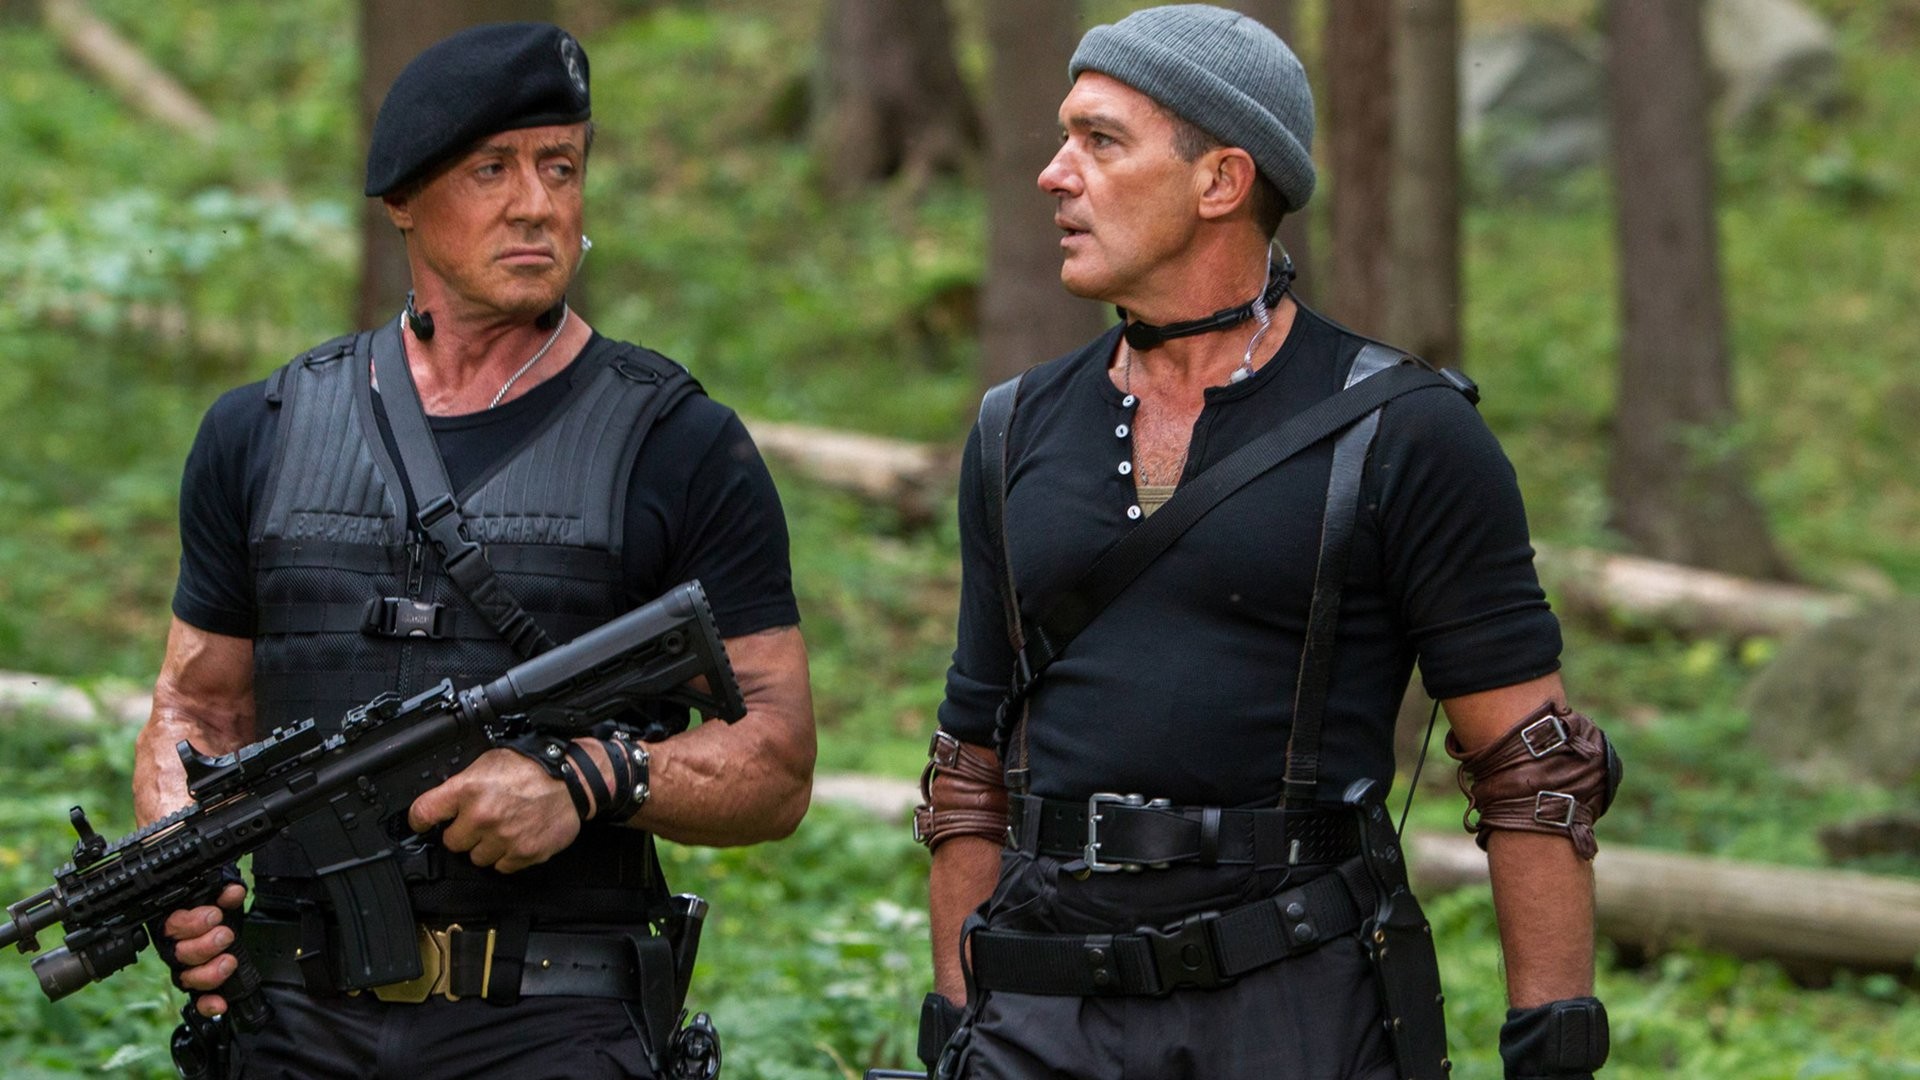 The Expendables 3 Barney Ross Sylvester Stallone Galgo The Expendables Antonio Banderas 1920x1080